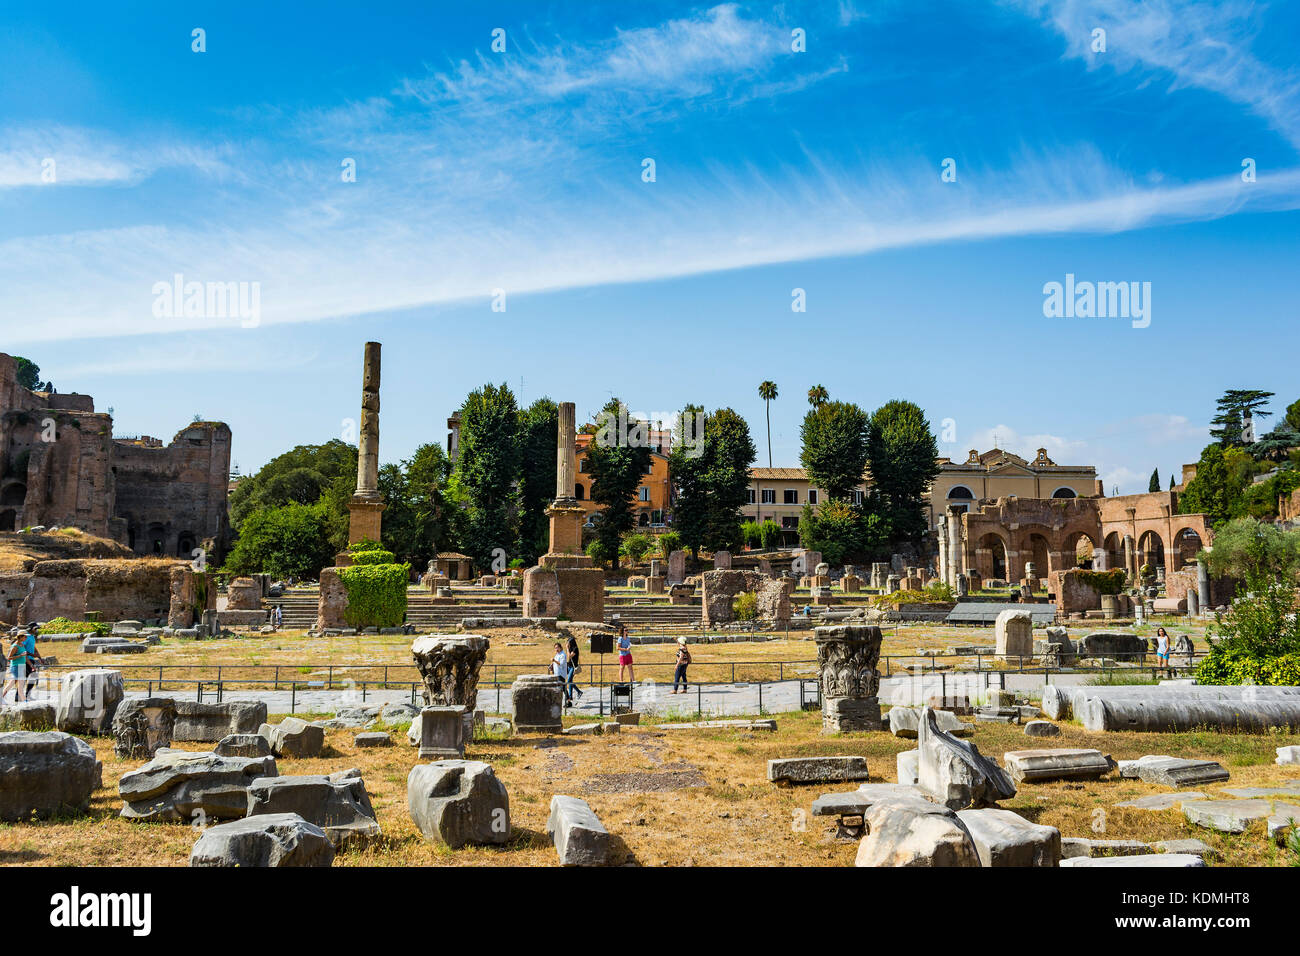 Rome, Italy - August 31, 2017: Ruins of the Roman Forum in Rome, Italy. The Roman Forum is one of the main tourist attractions of Rome. Stock Photo